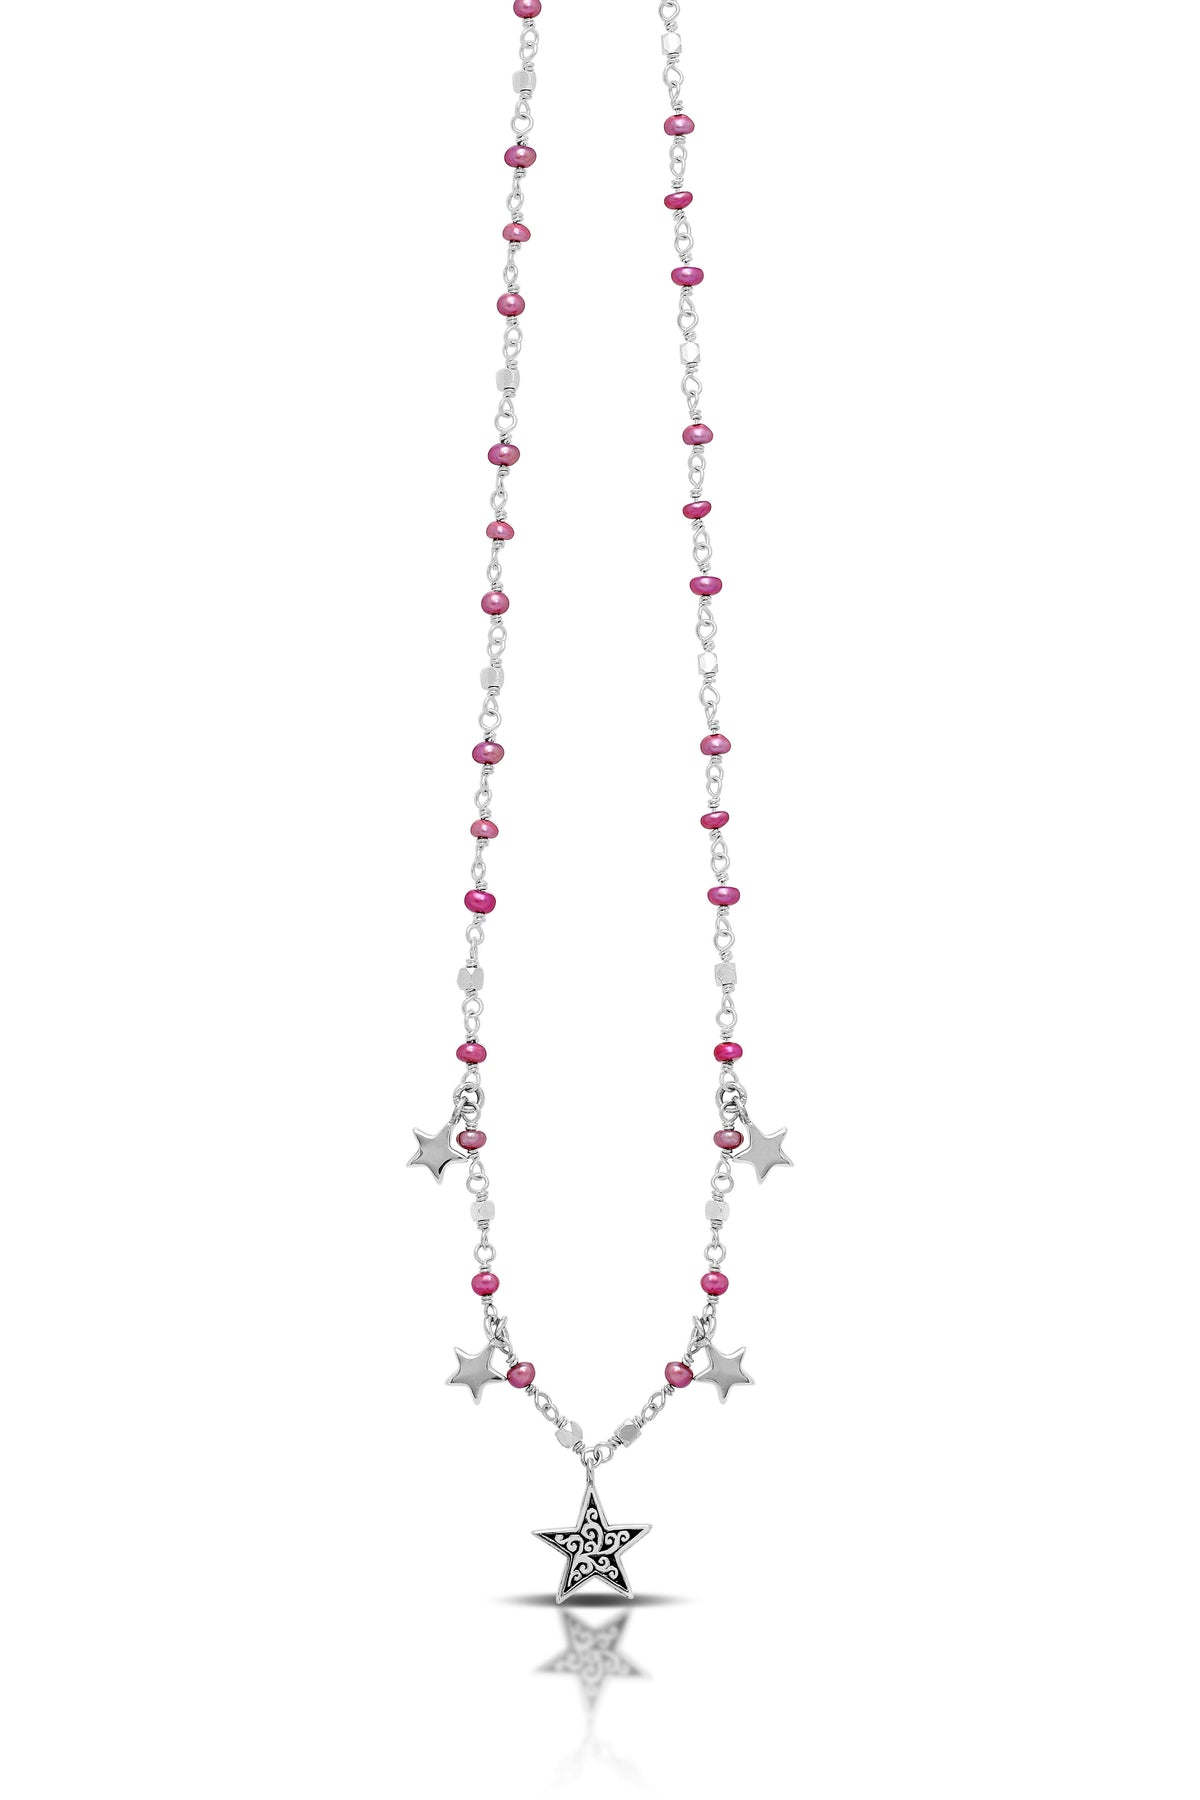 Pink Pearl Bead (3mm) with Scroll Sterling Silver Bead and Star Charm Necklace. 17" Chain